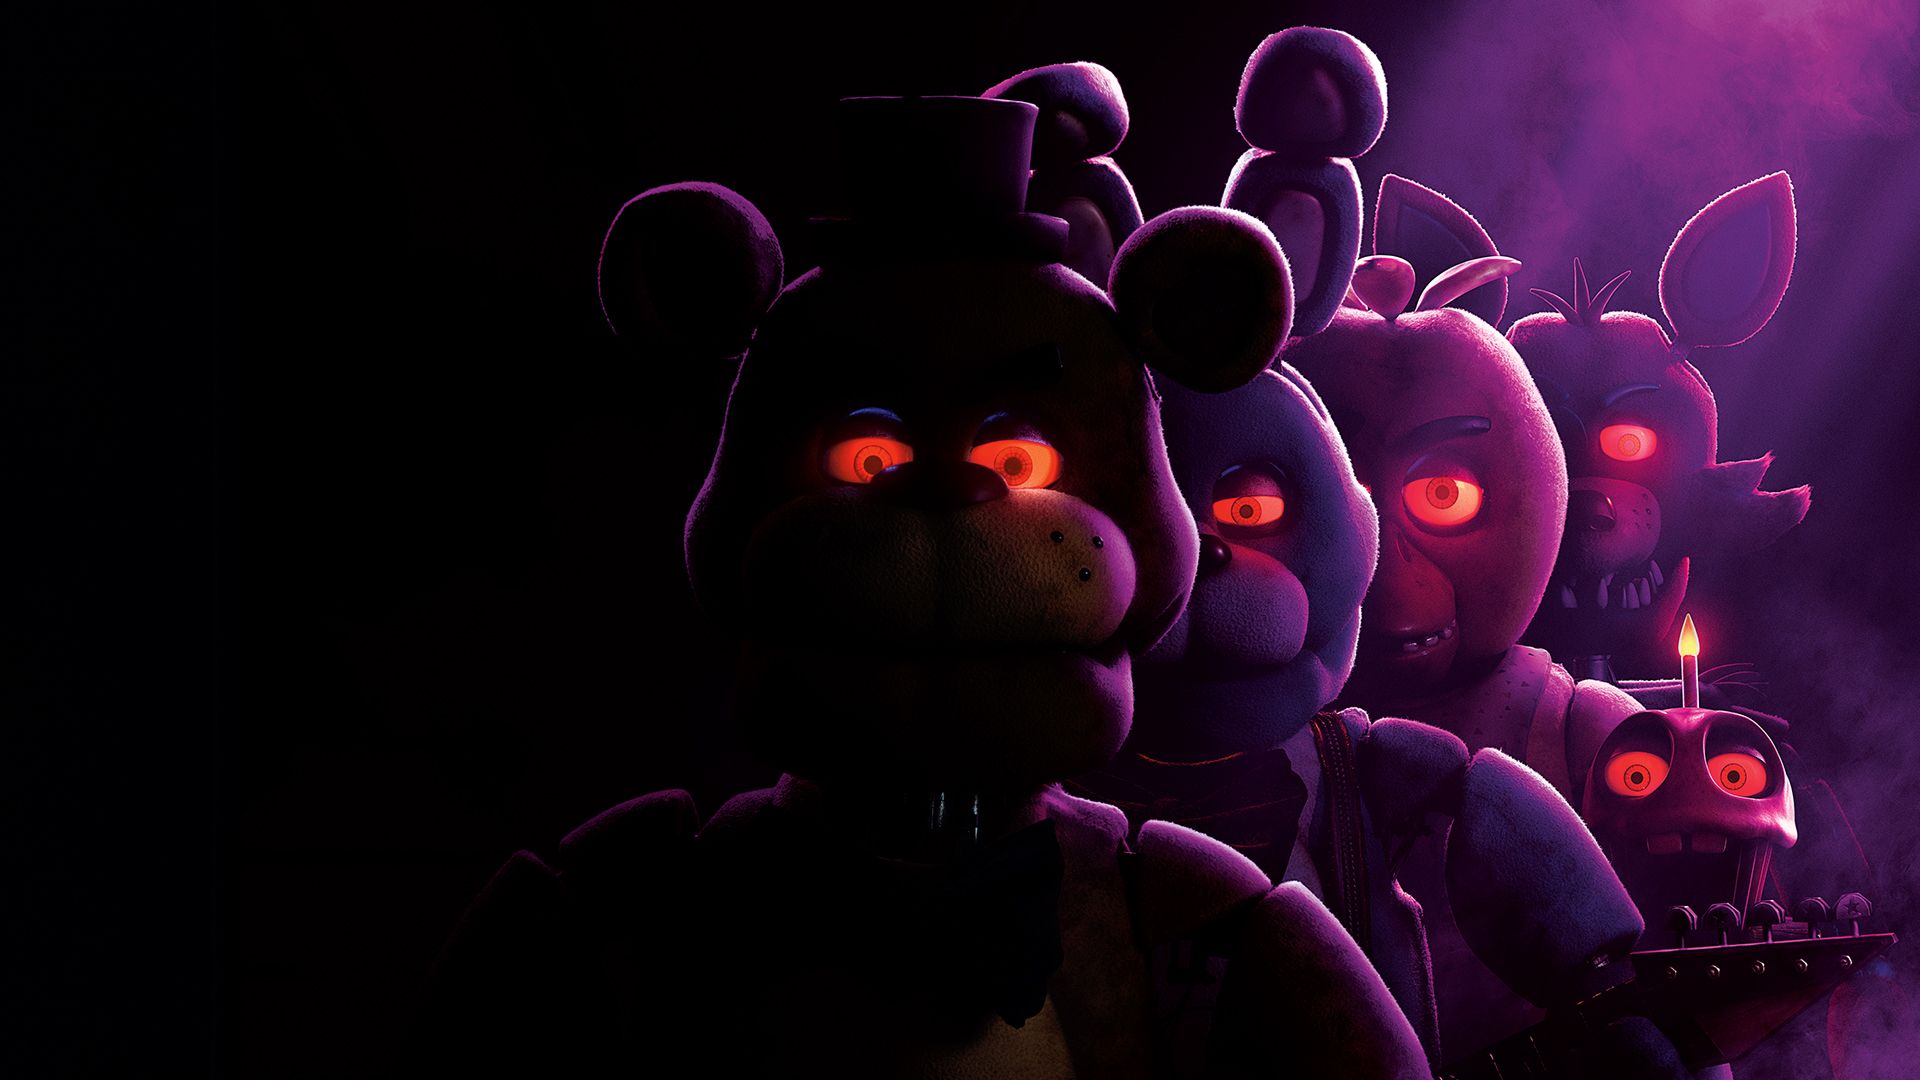 Five Nights at Freddy's background